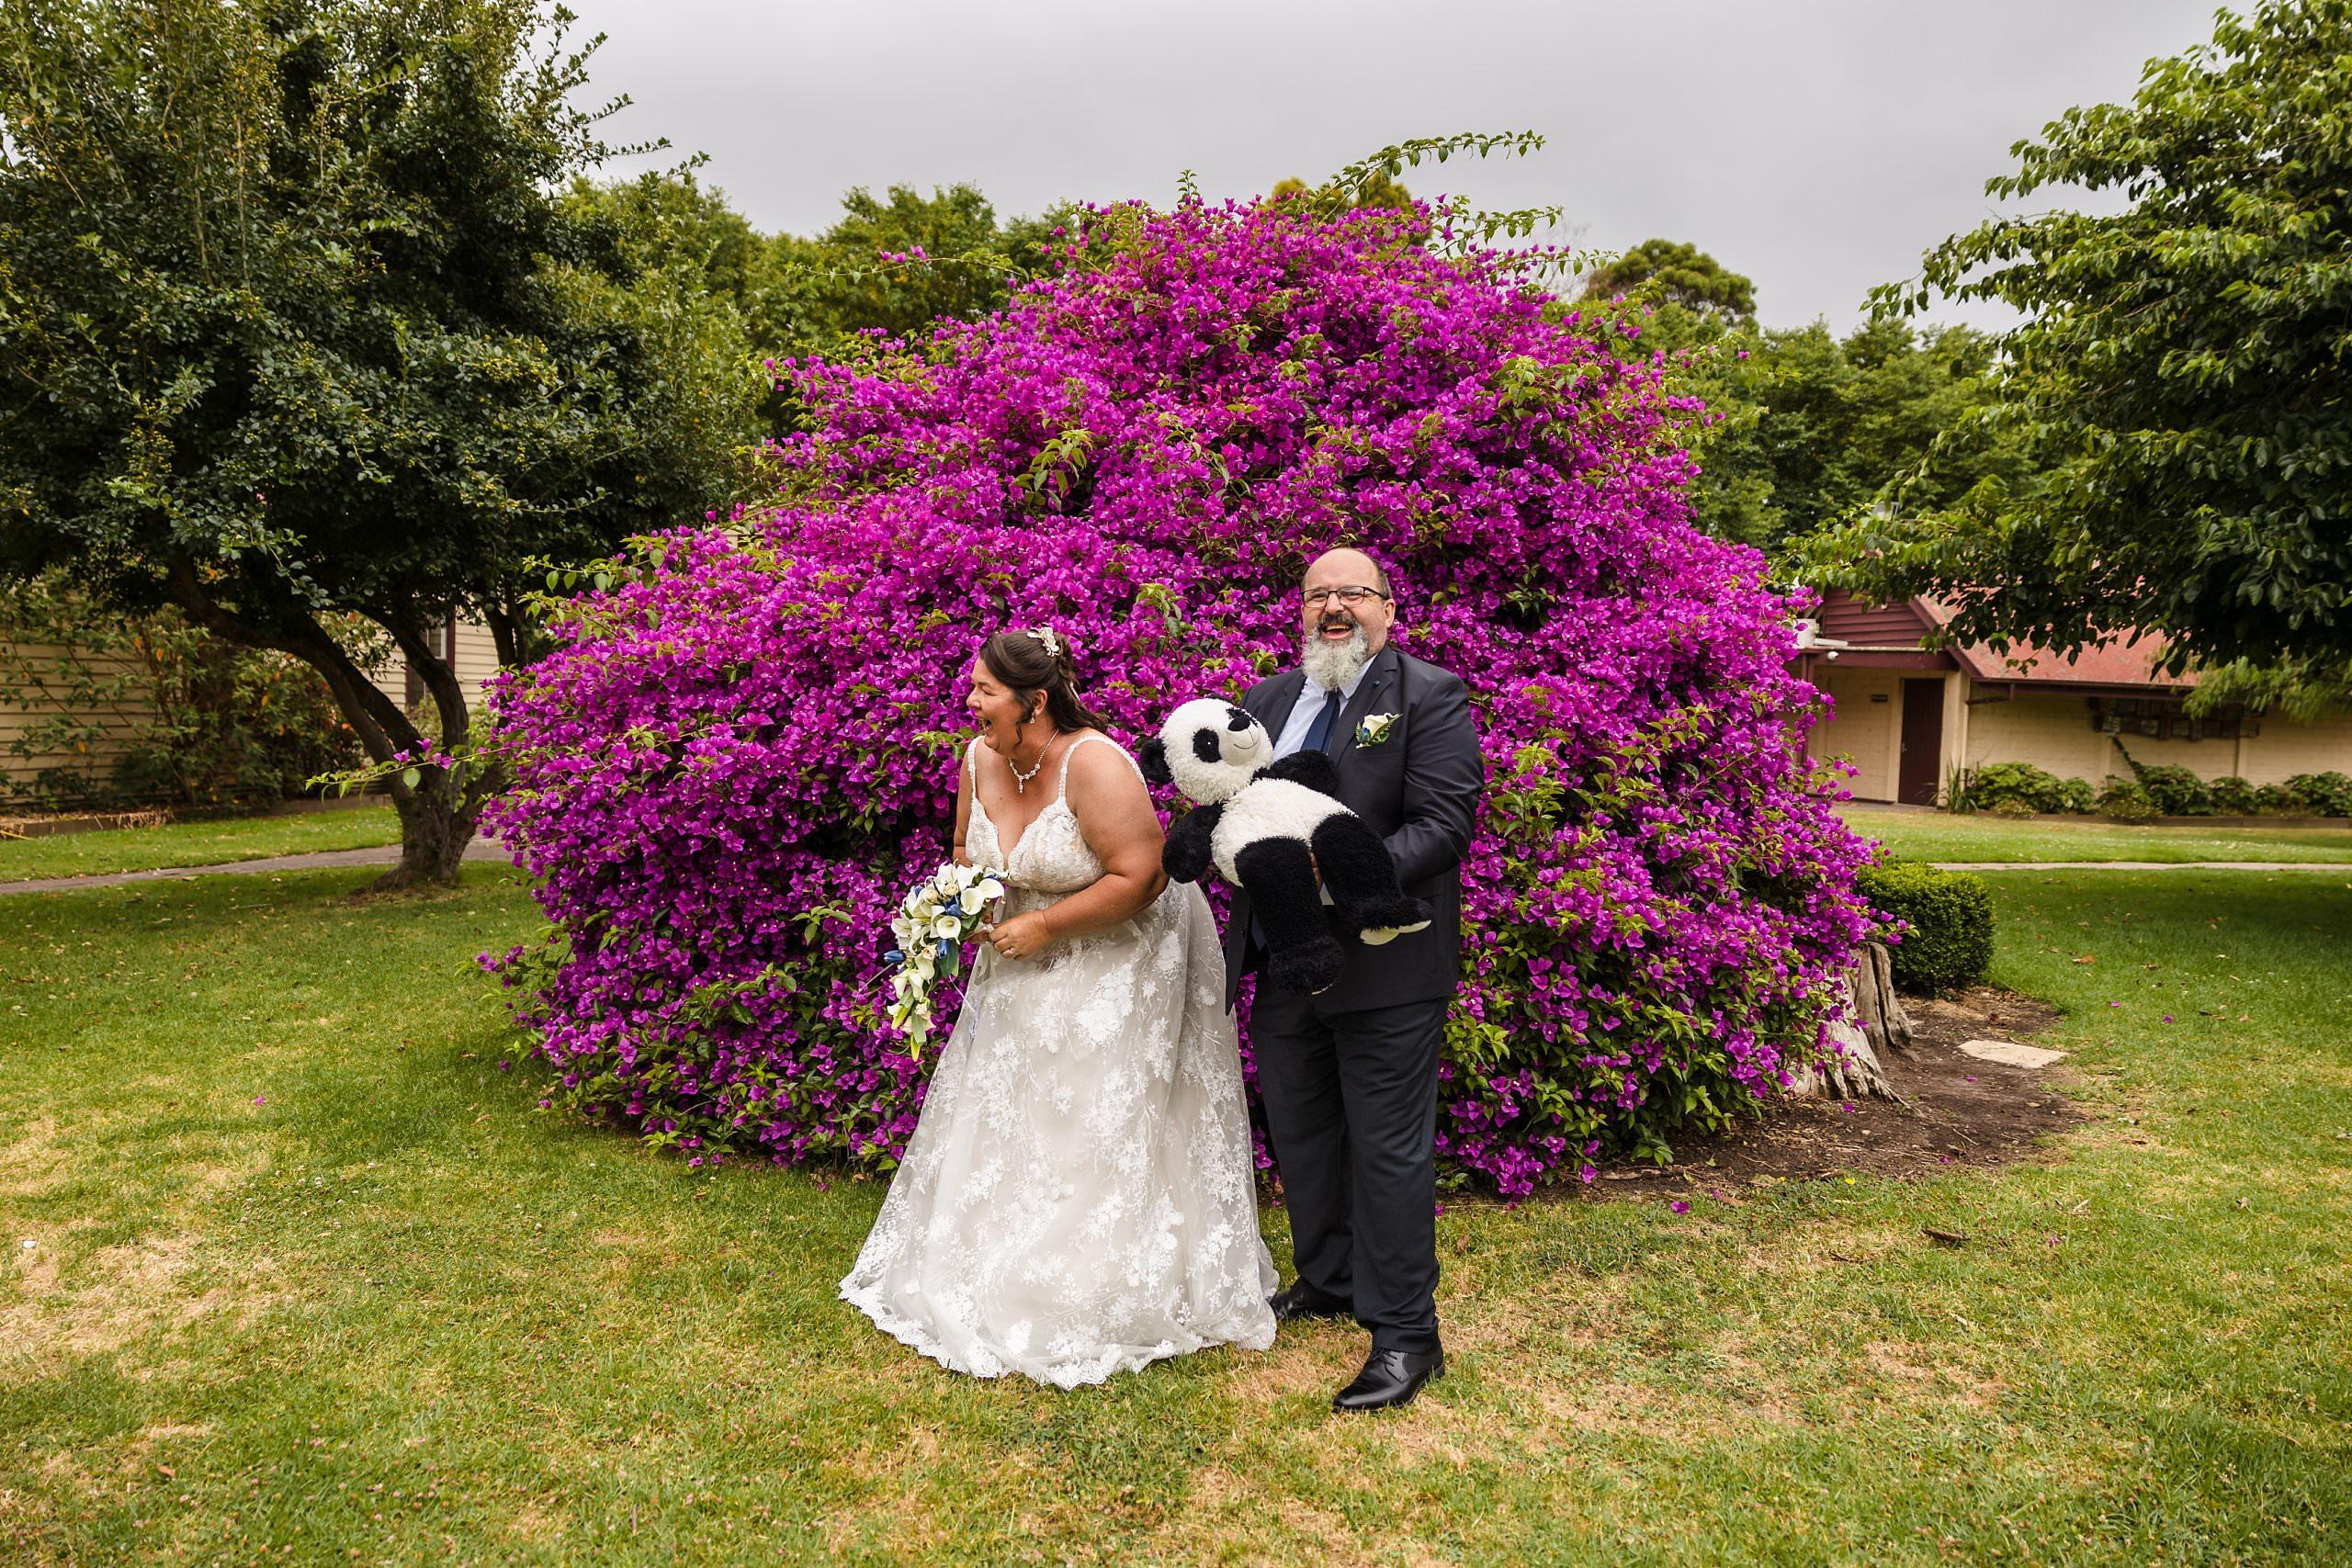 old cheese factory wedding portraits in front of the bush covered in purple flowers